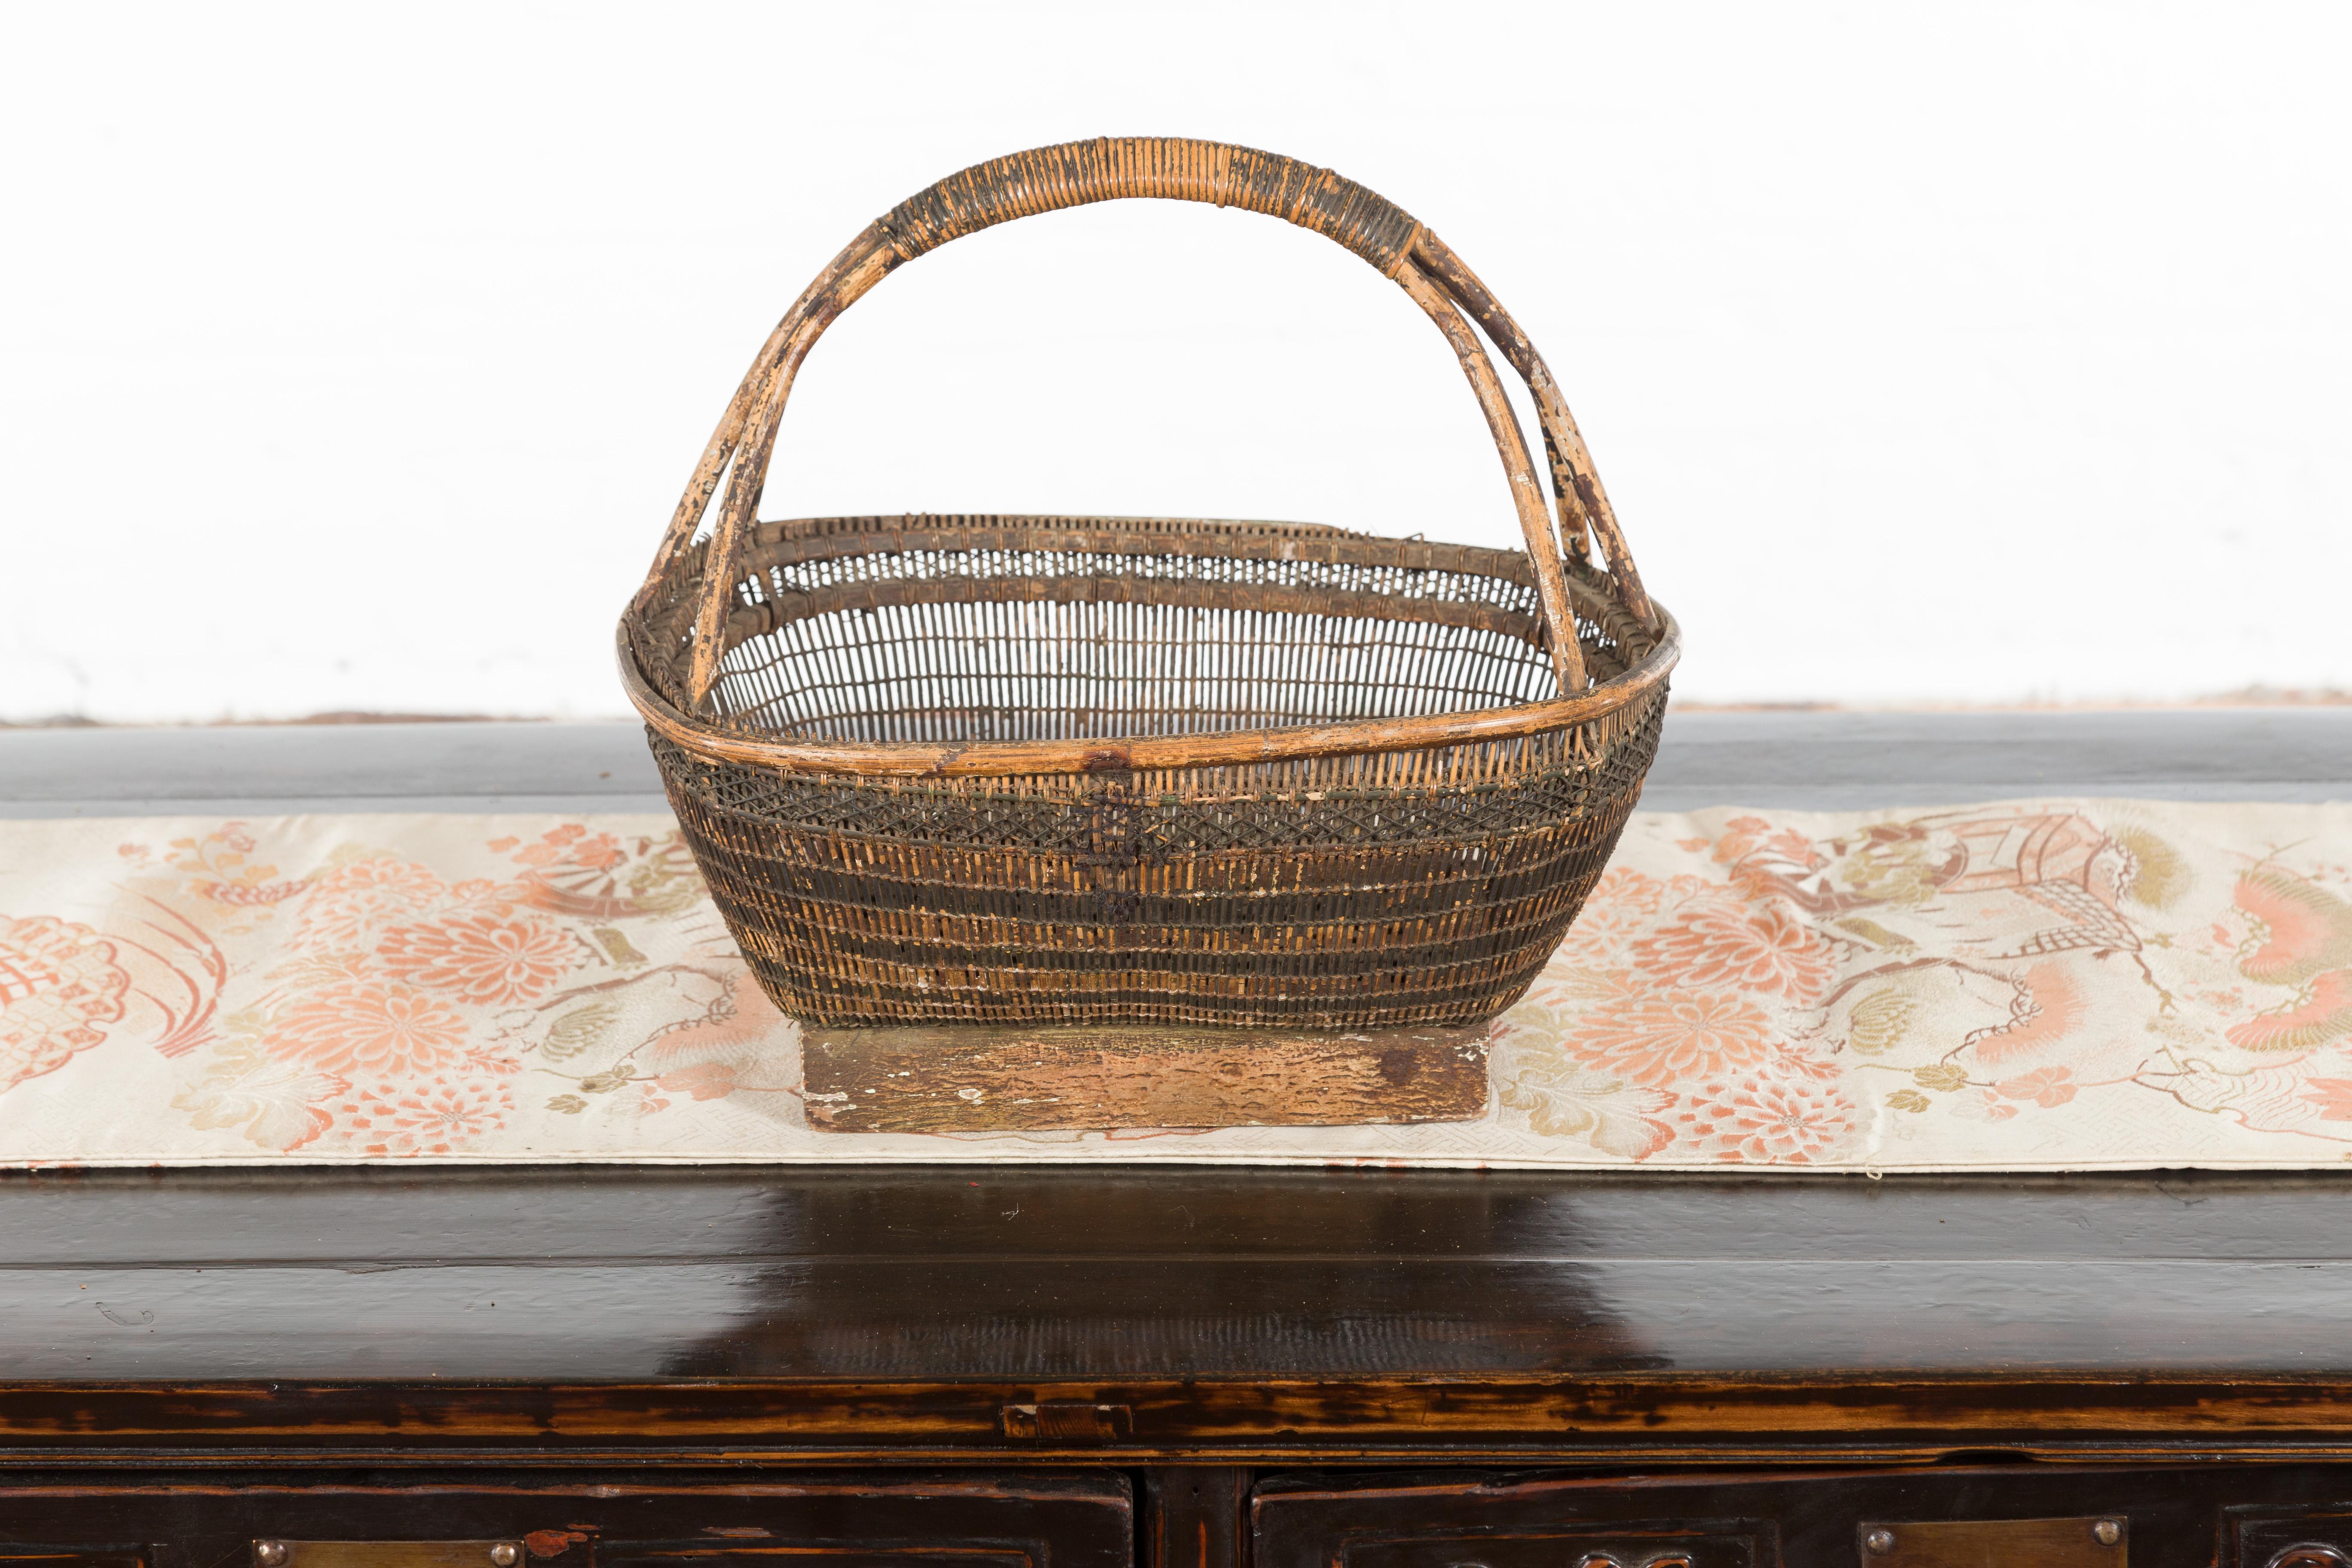 Chinese Rustic Vintage Woven Rattan Market Basket with Large Handle and Base 5